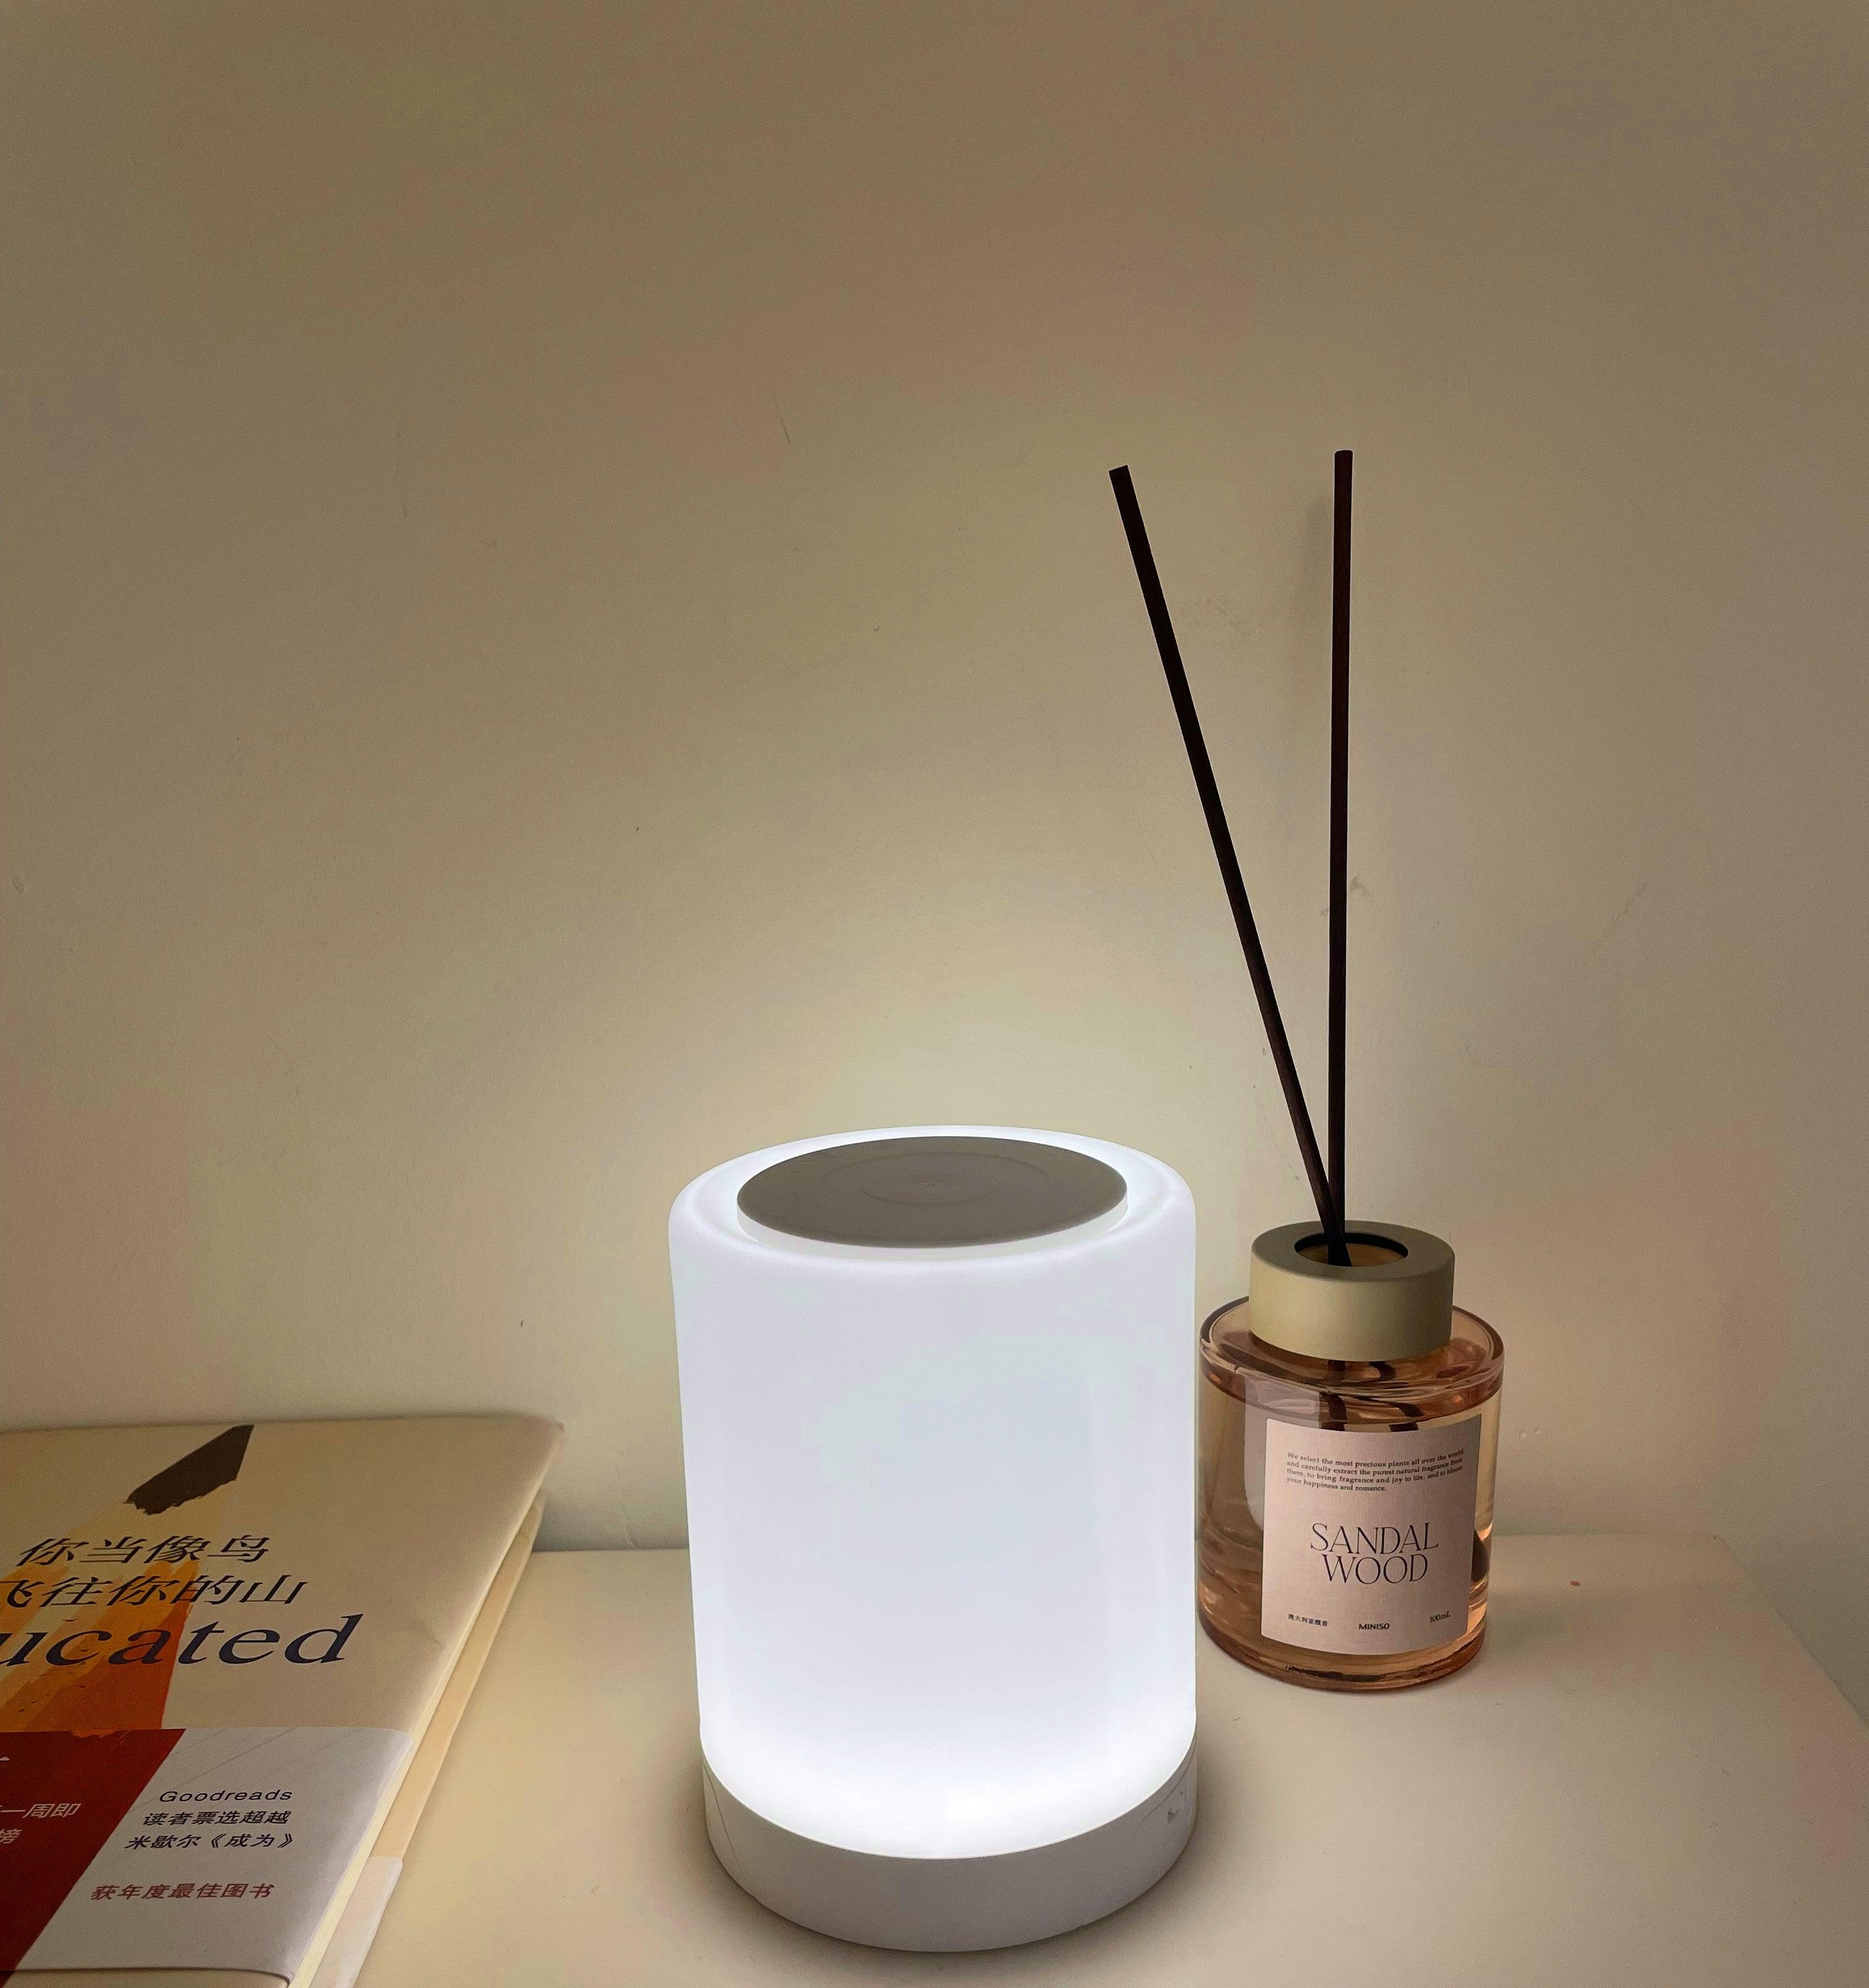 New Touch Desktop Color Ring Colorful Creative Wood Grain Charging Night Light Shooting Light Atmosphere - MyStoreLiving